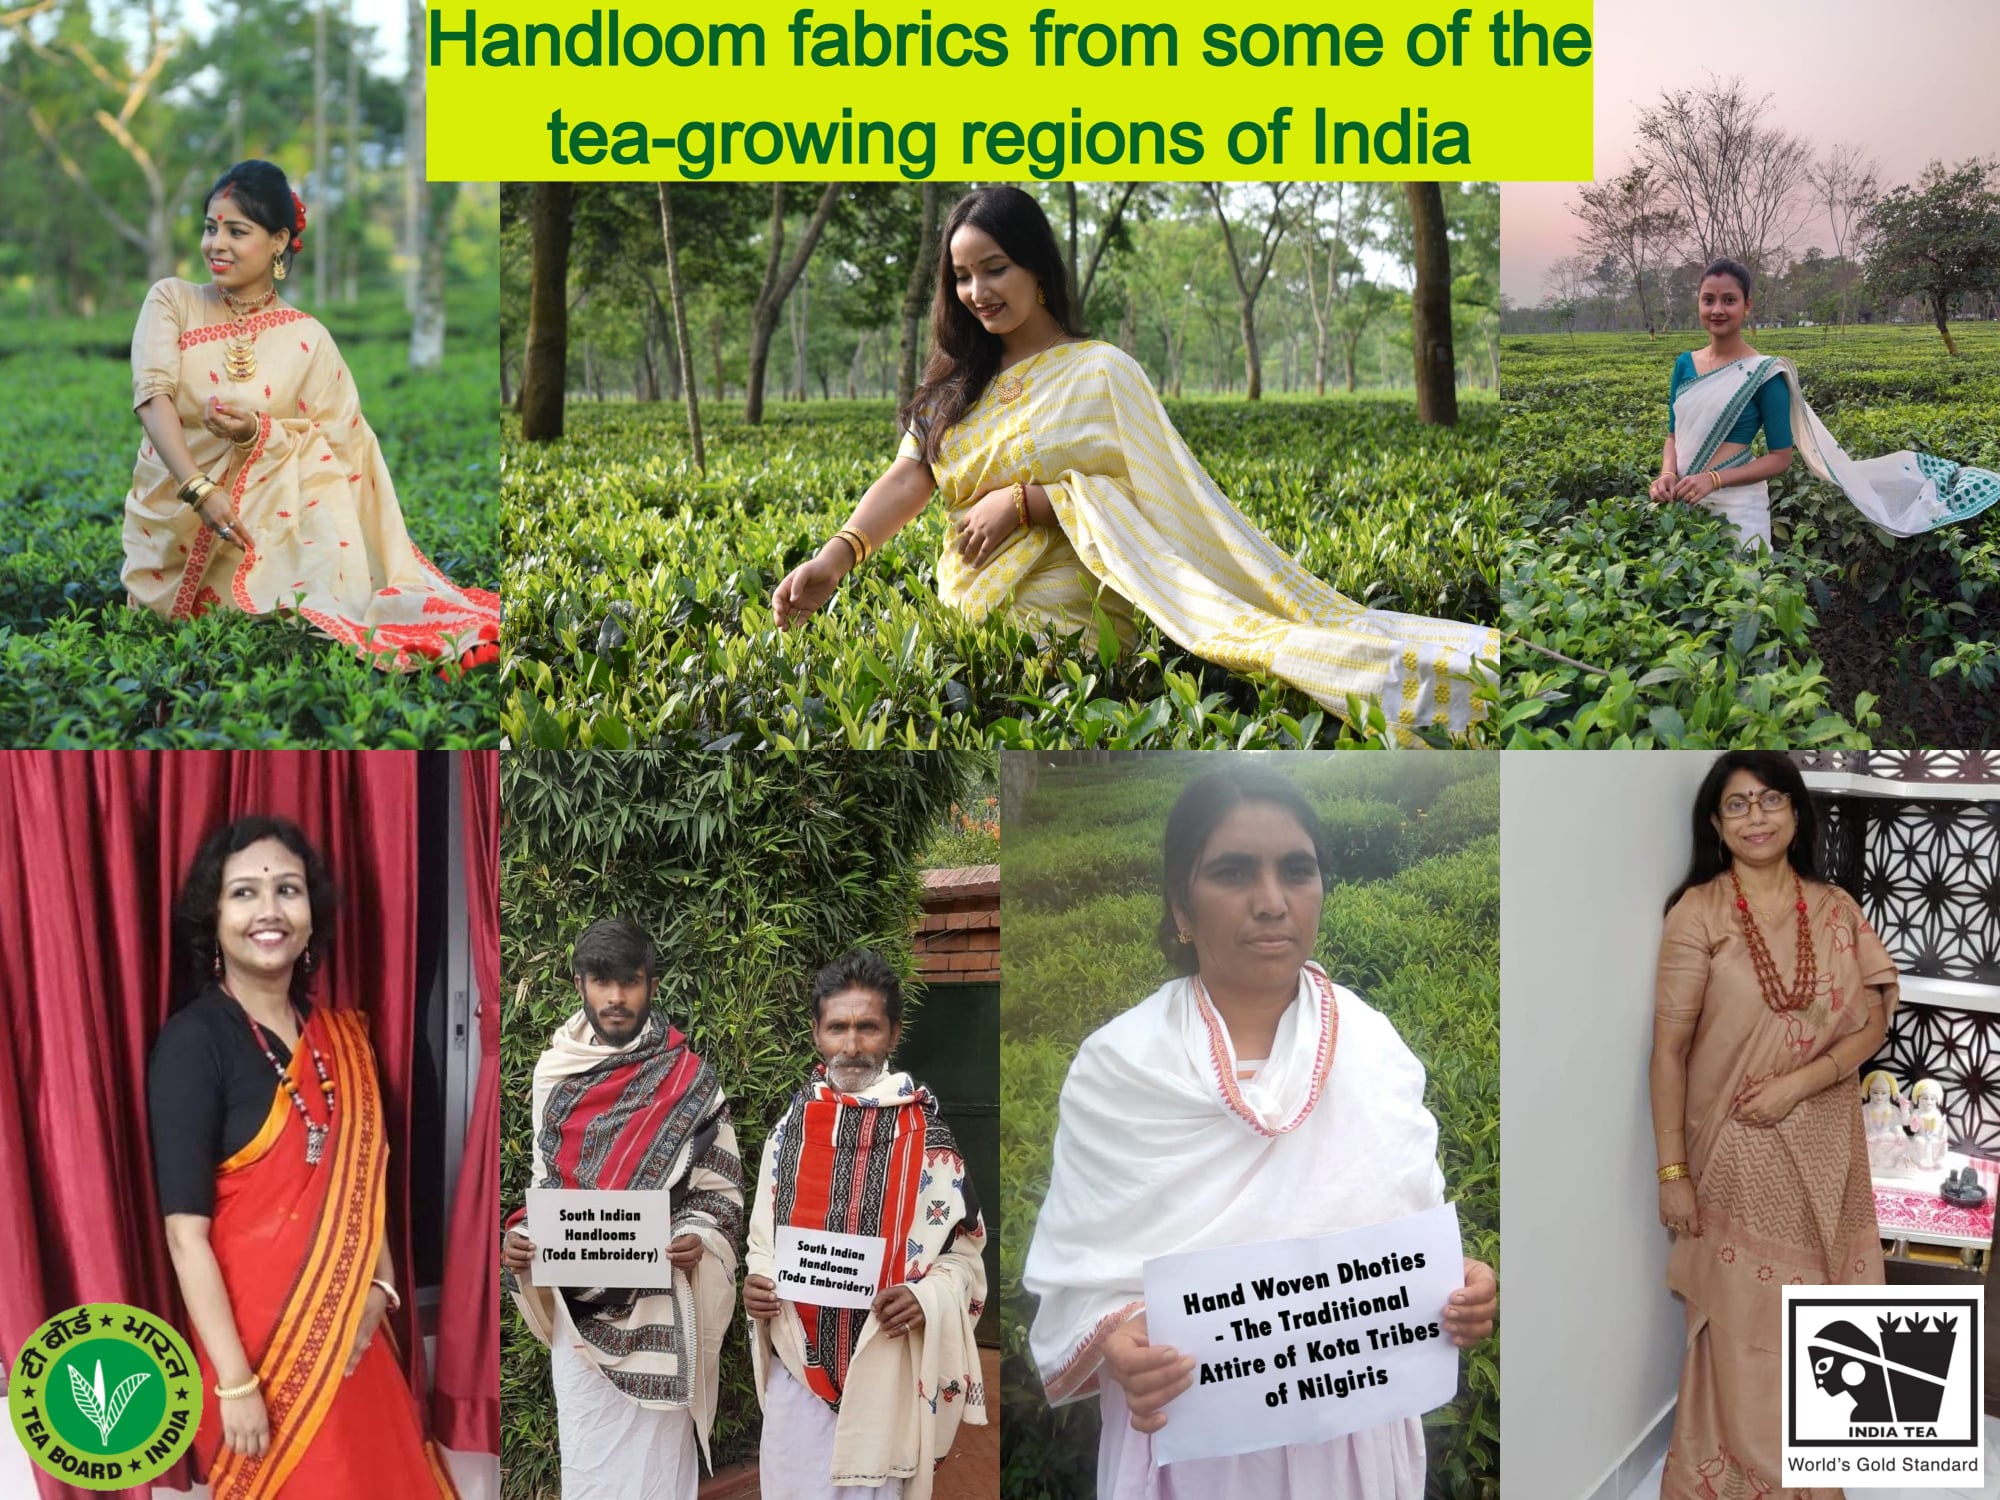 Handloom fabrics from some of the tea-growing regions of India